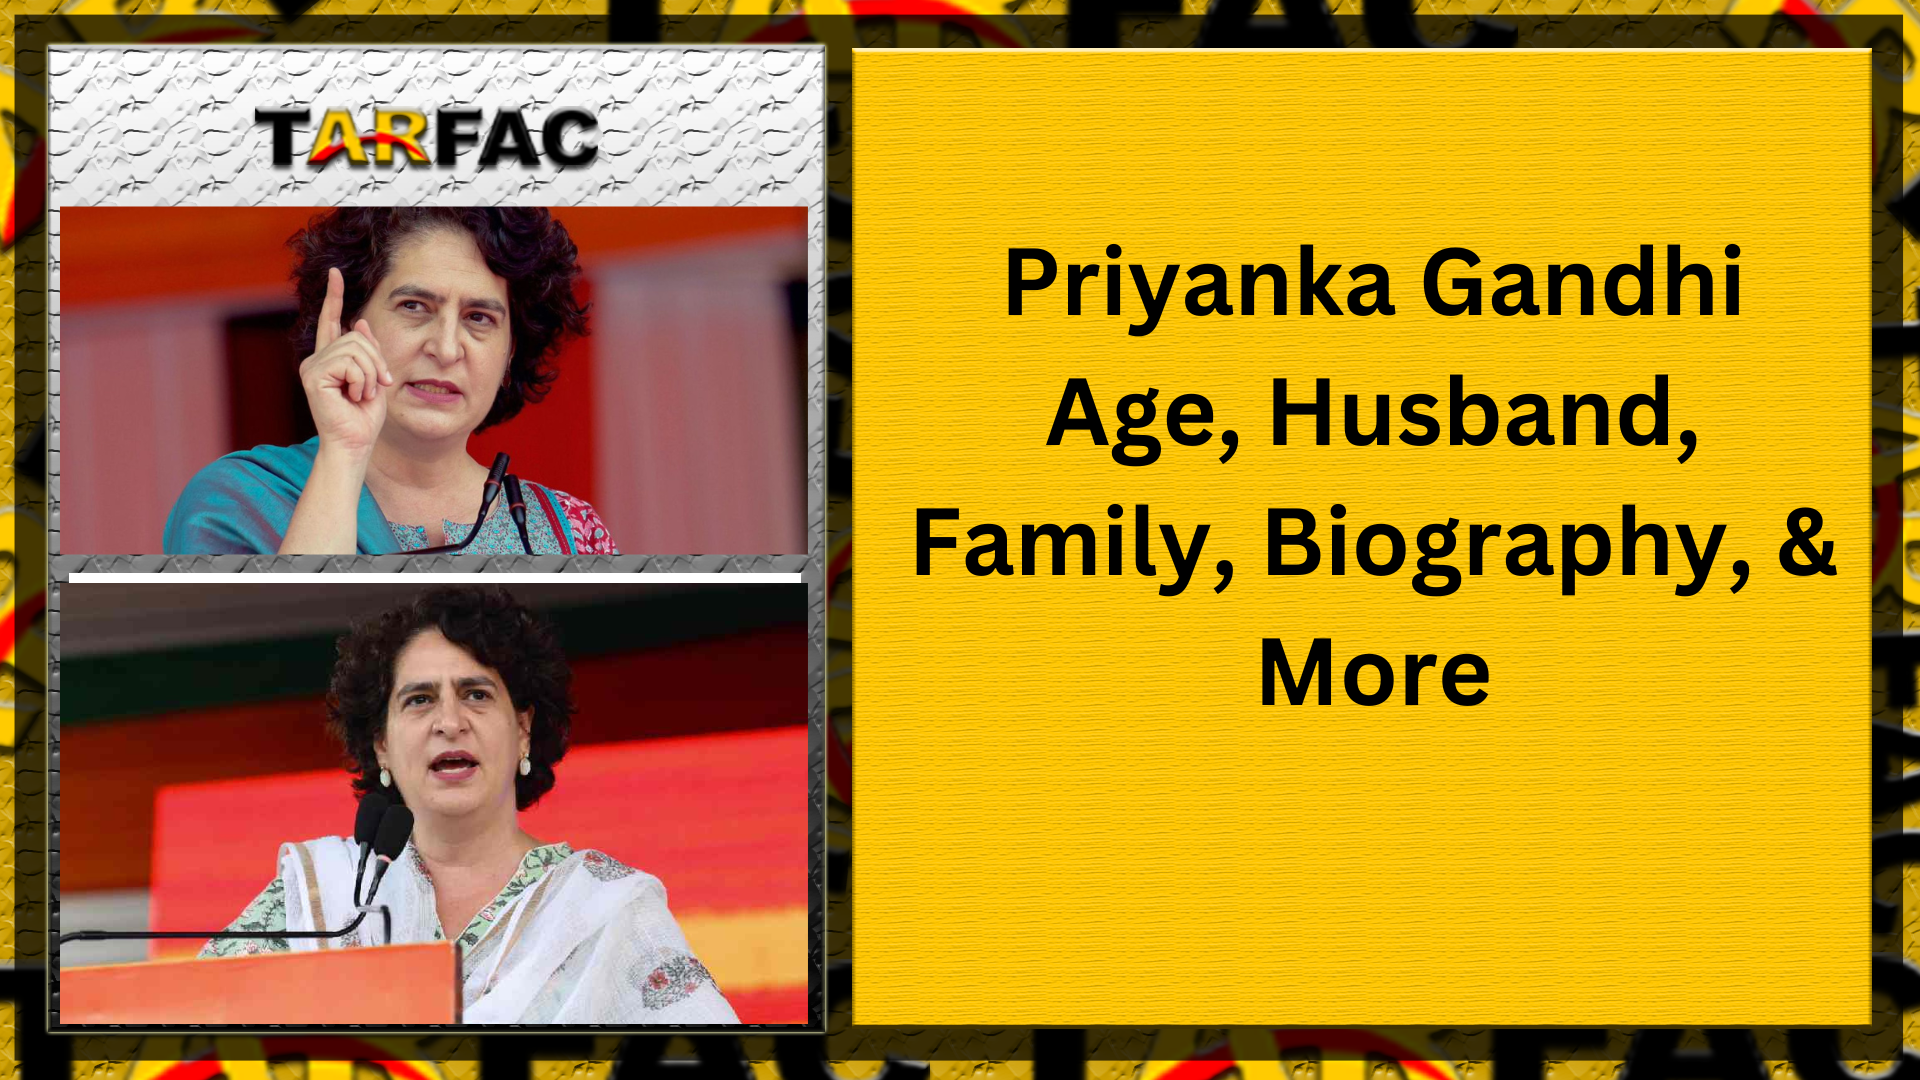 You are currently viewing Priyanka Gandhi Age, Husband, Family, Biography, & More